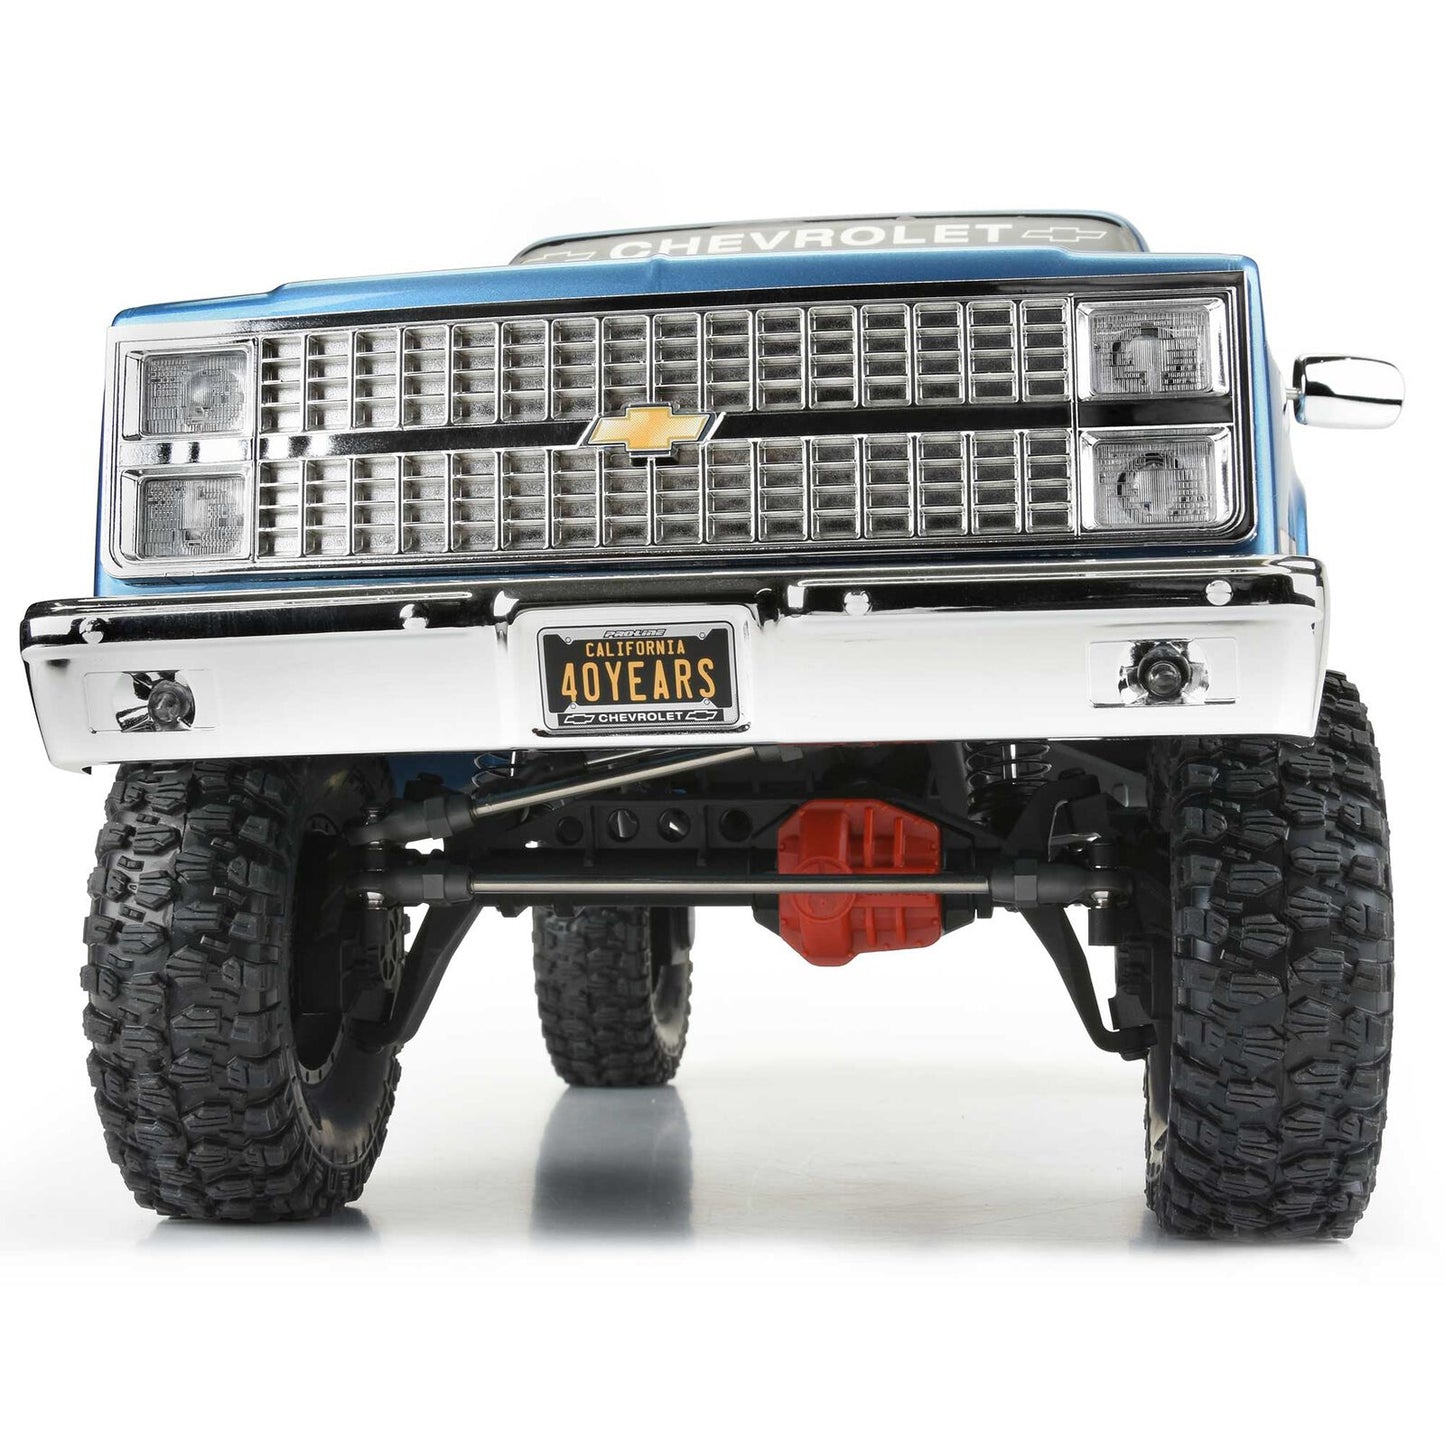 Axial - AXI03029 1/10 SCX10 III Pro-Line 1982 Chevy K10 4WD Rock Crawler Brushed